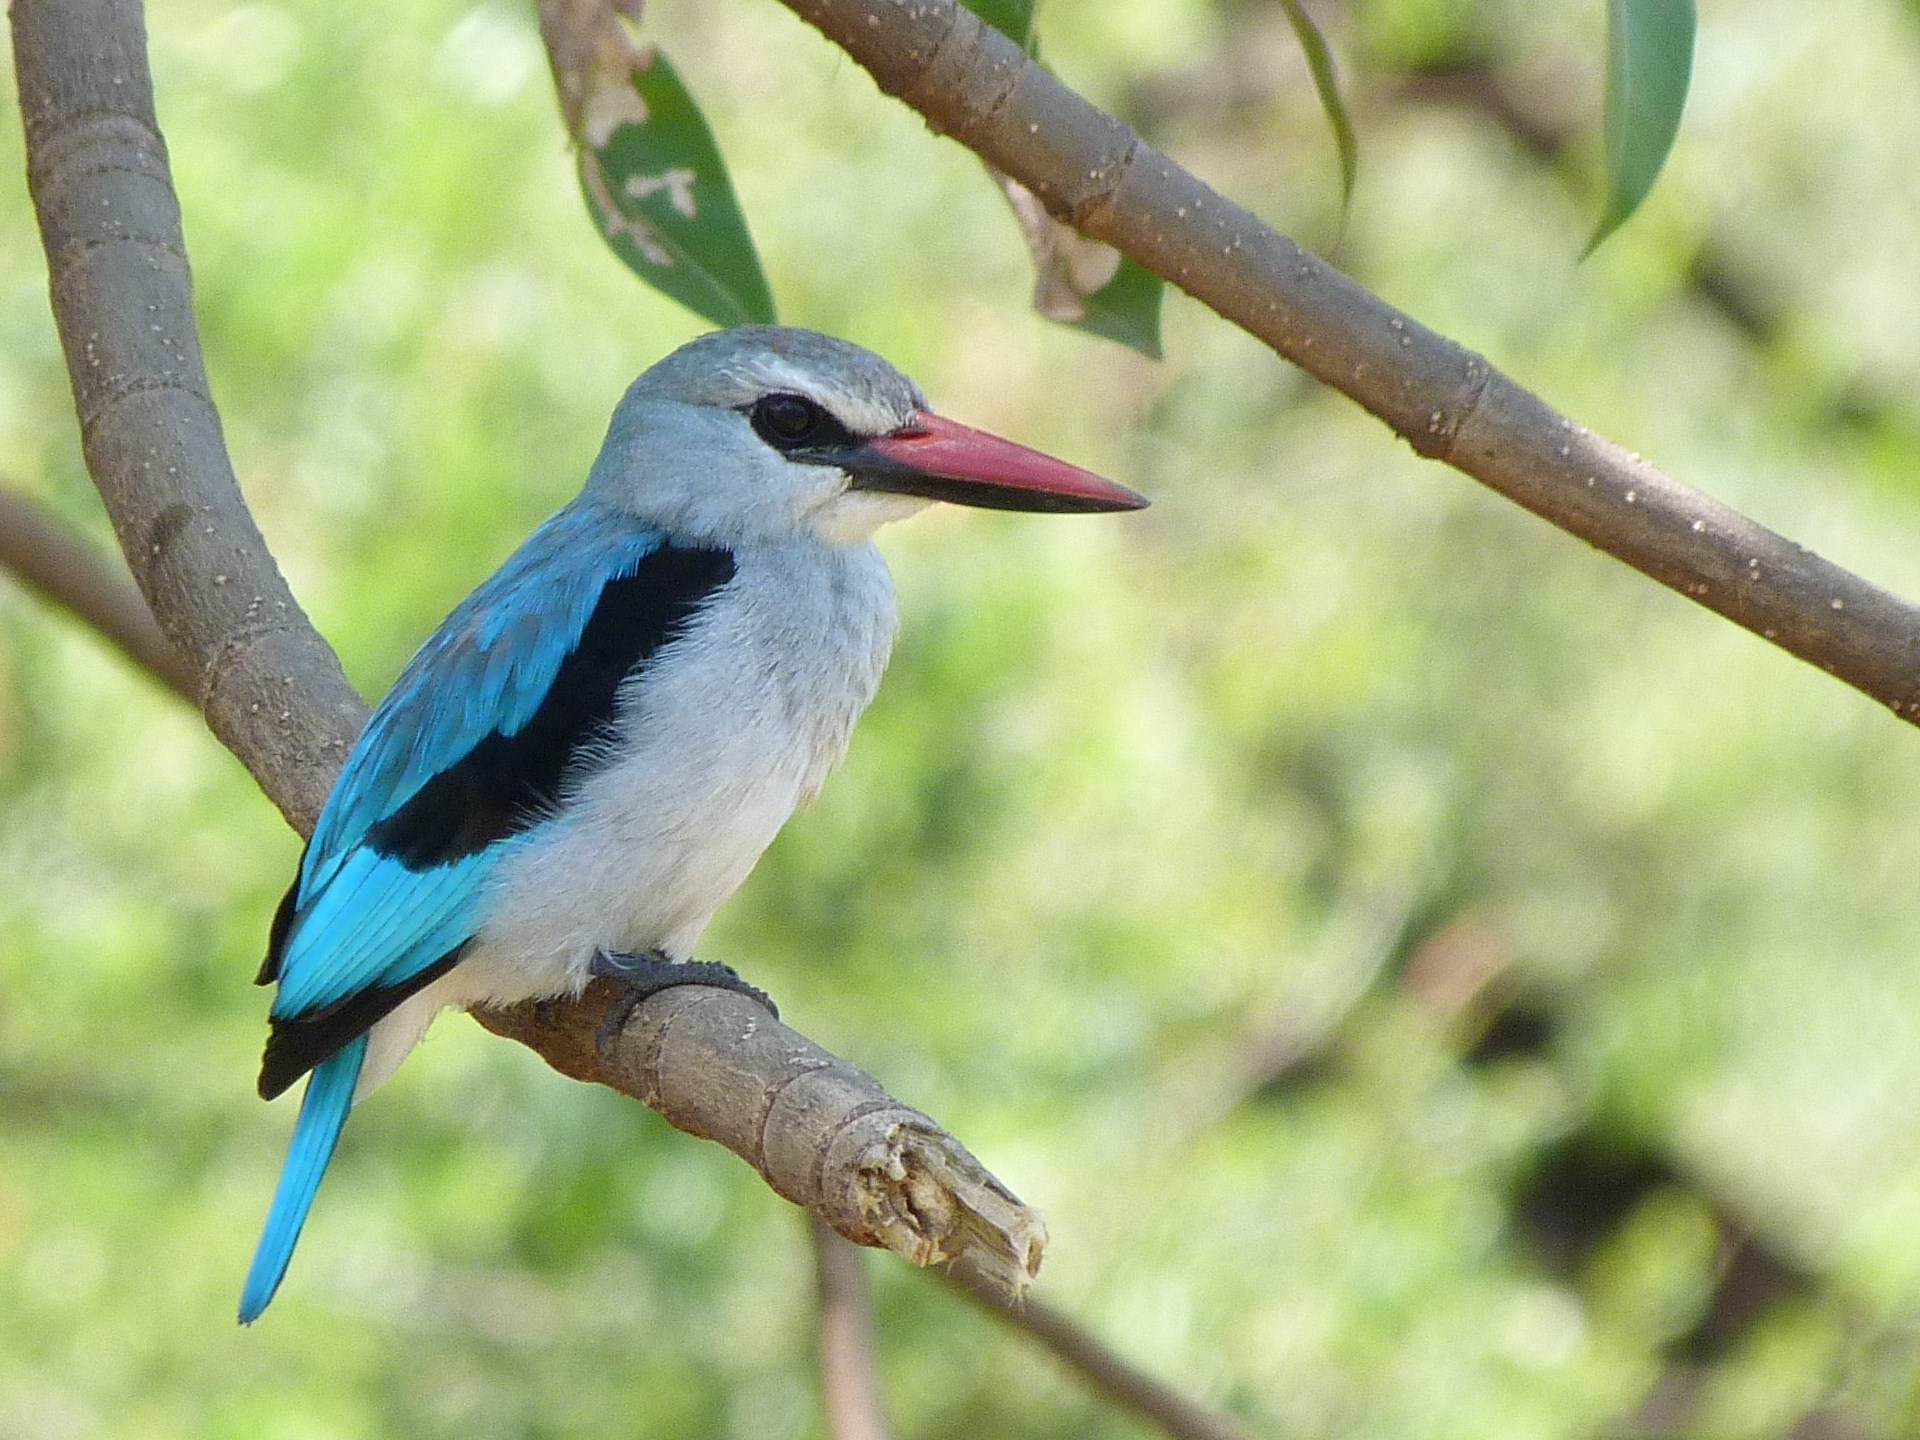 Image: Woodland Kingfishers (Halcyon senegalensis) is a typical dry bush species across much of Africa